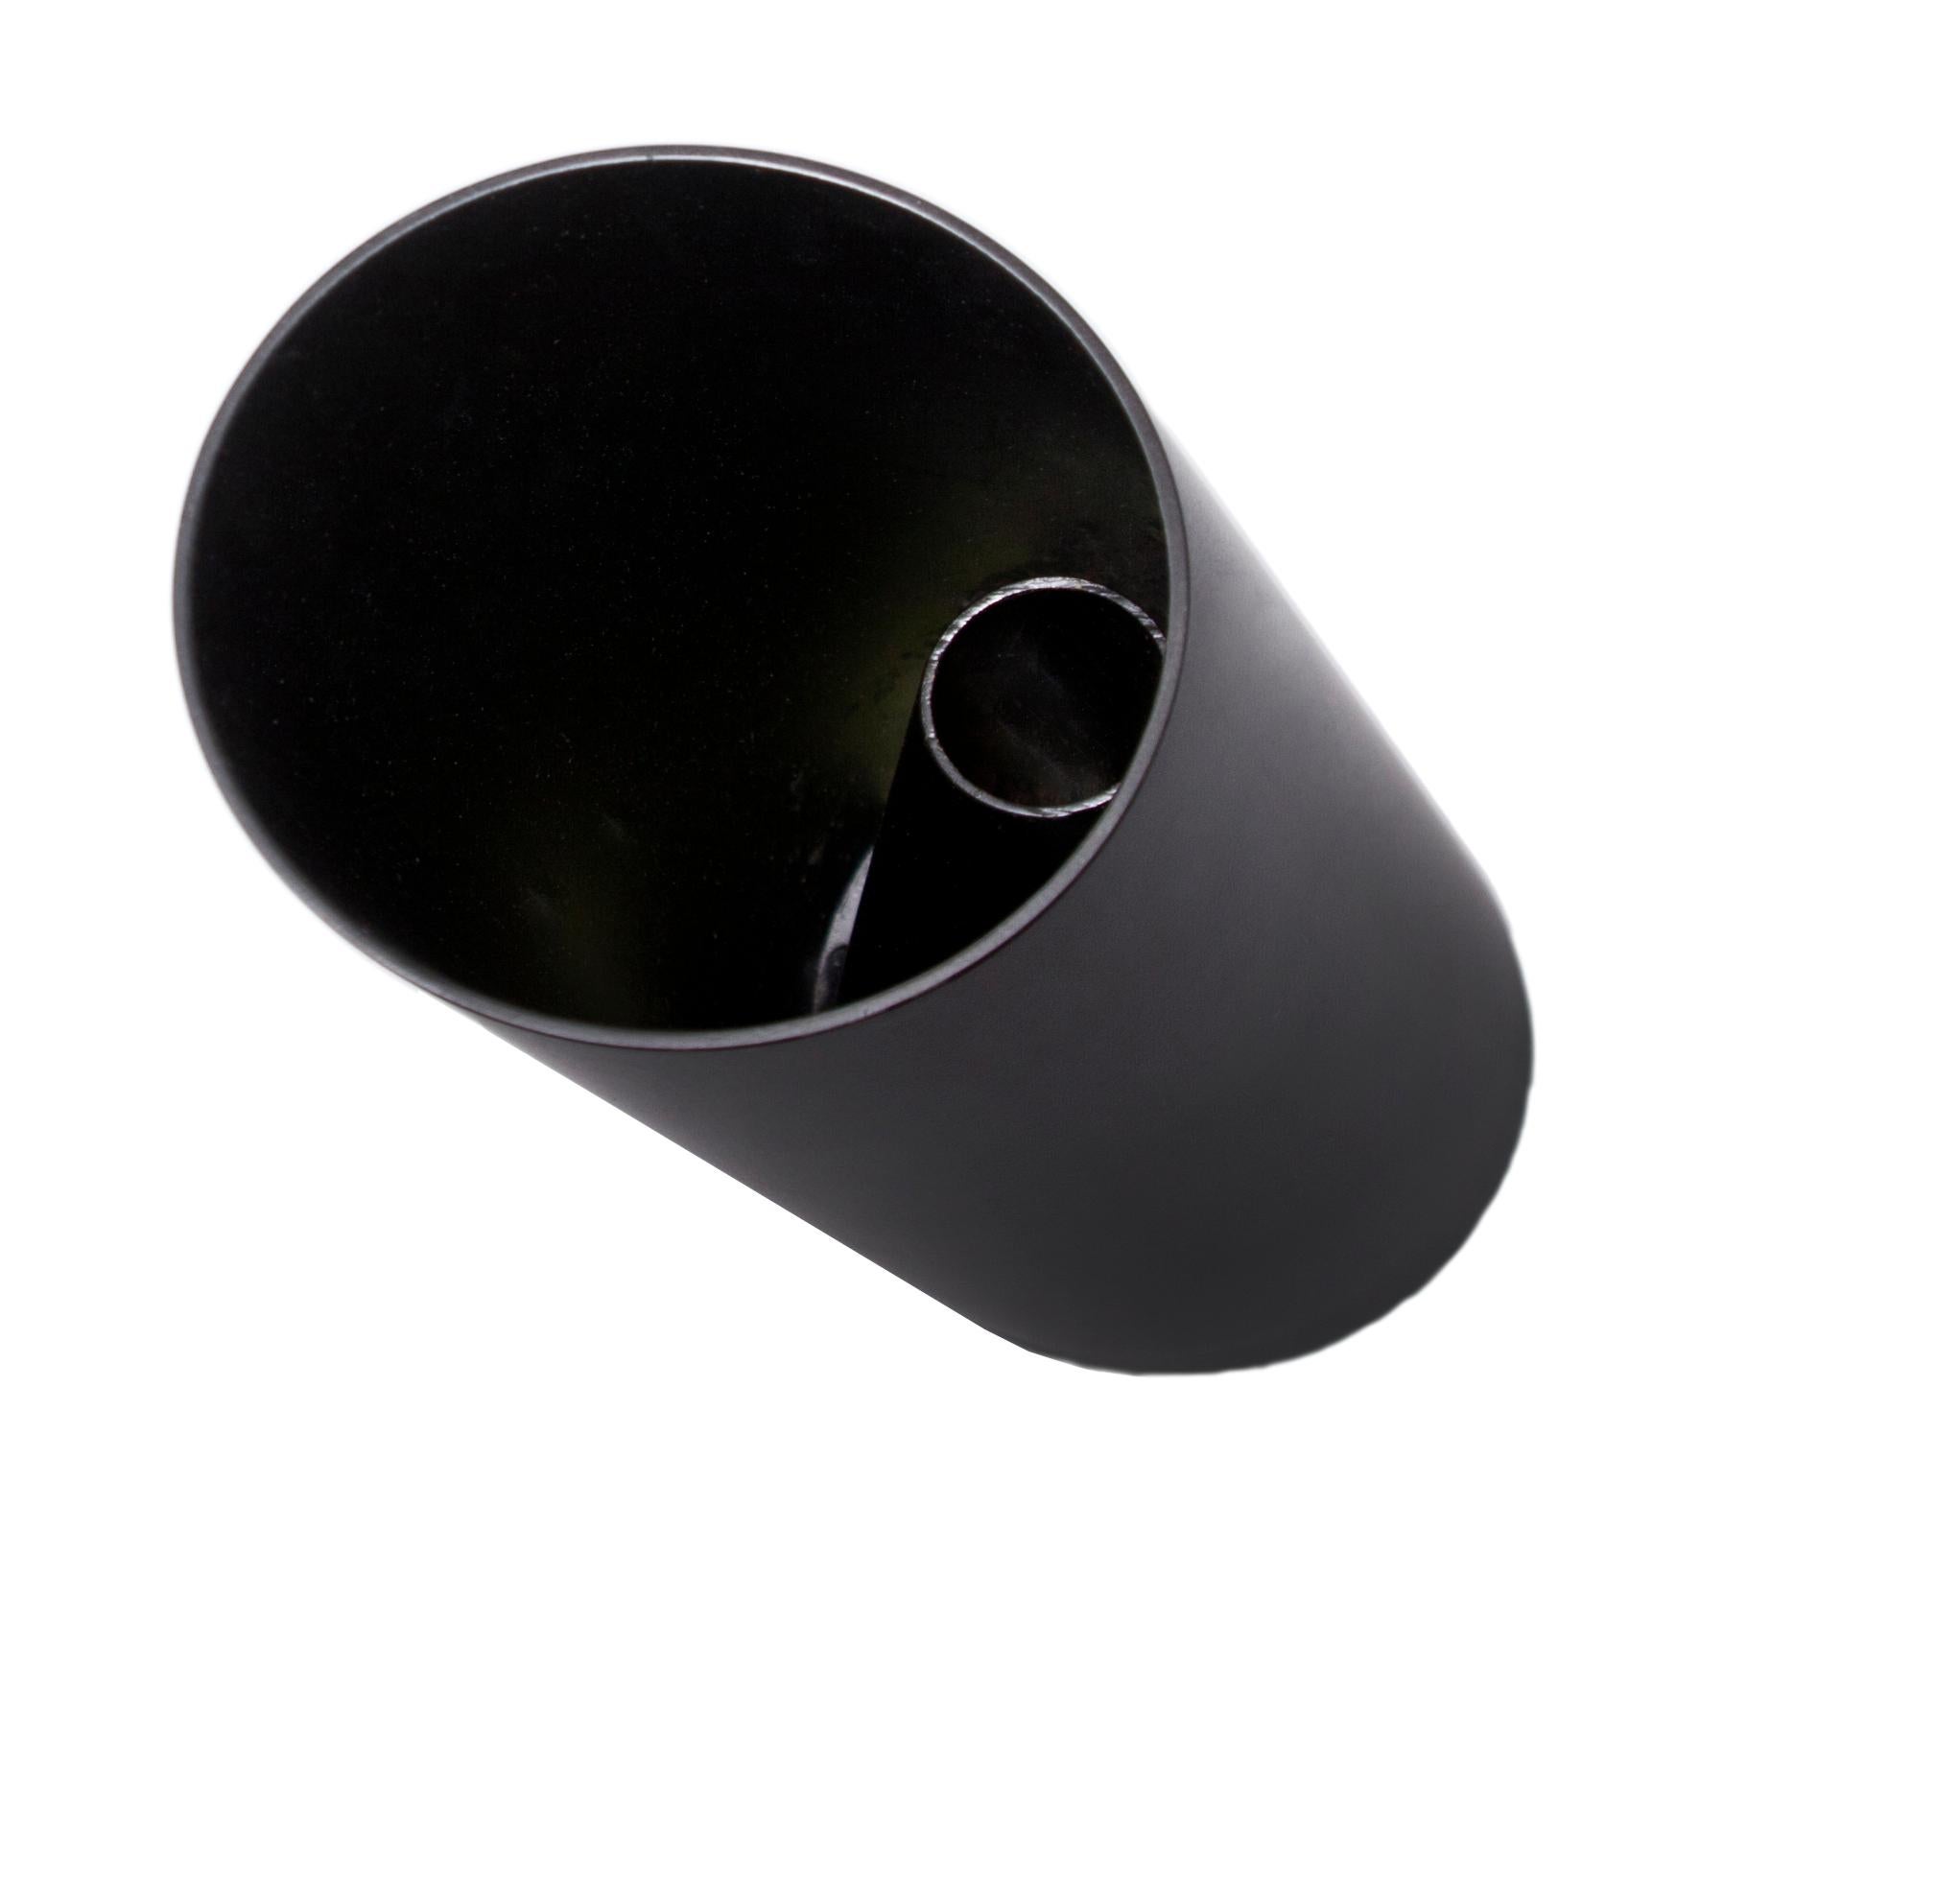 Two vases in one, composed of a series of black minimal hand-painted stainless steel tubes in various dimensions and cut on the bias, the contemporary Bana Double vase can uniquely accommodate a single stem to full flower arrangements separately or